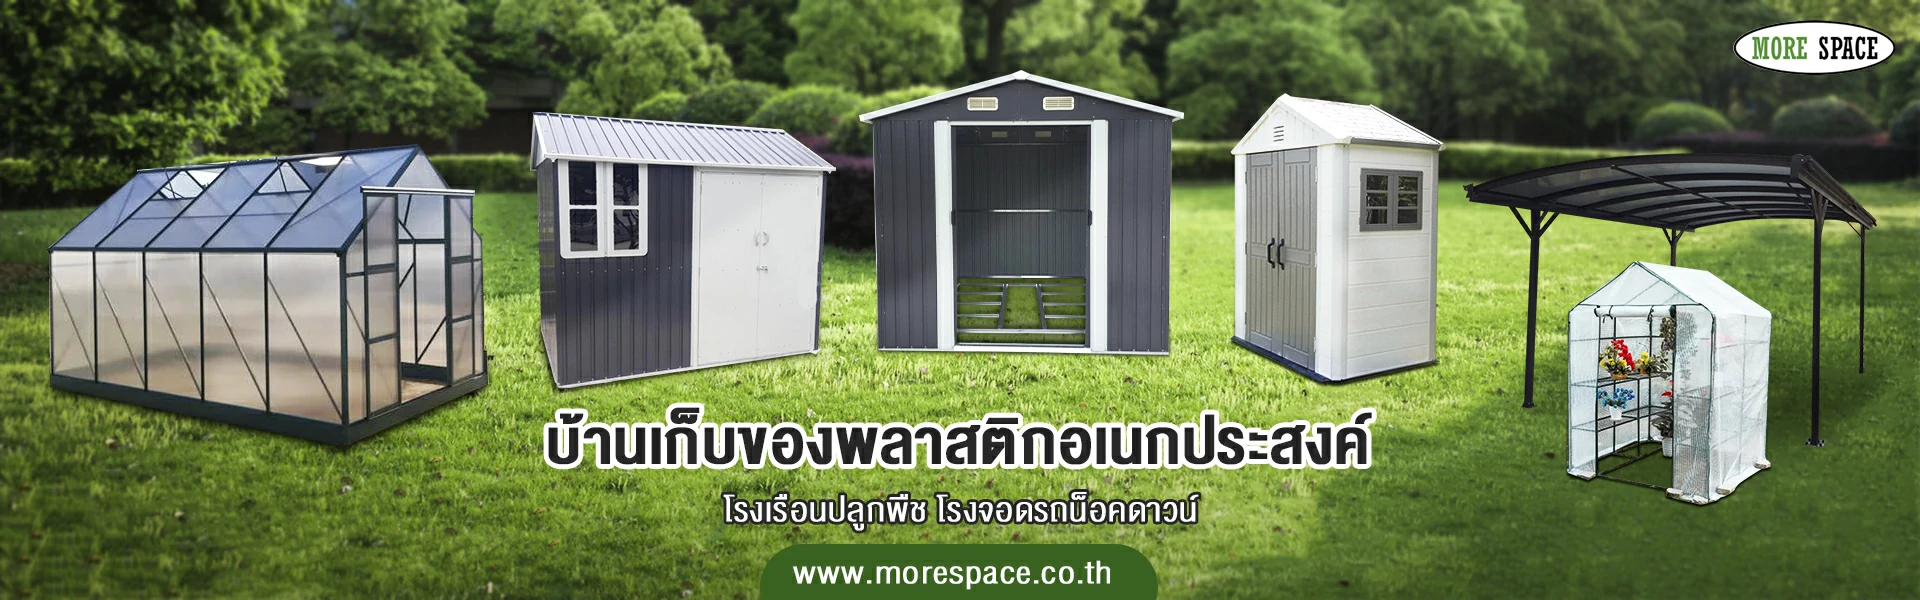 morespace.co.th